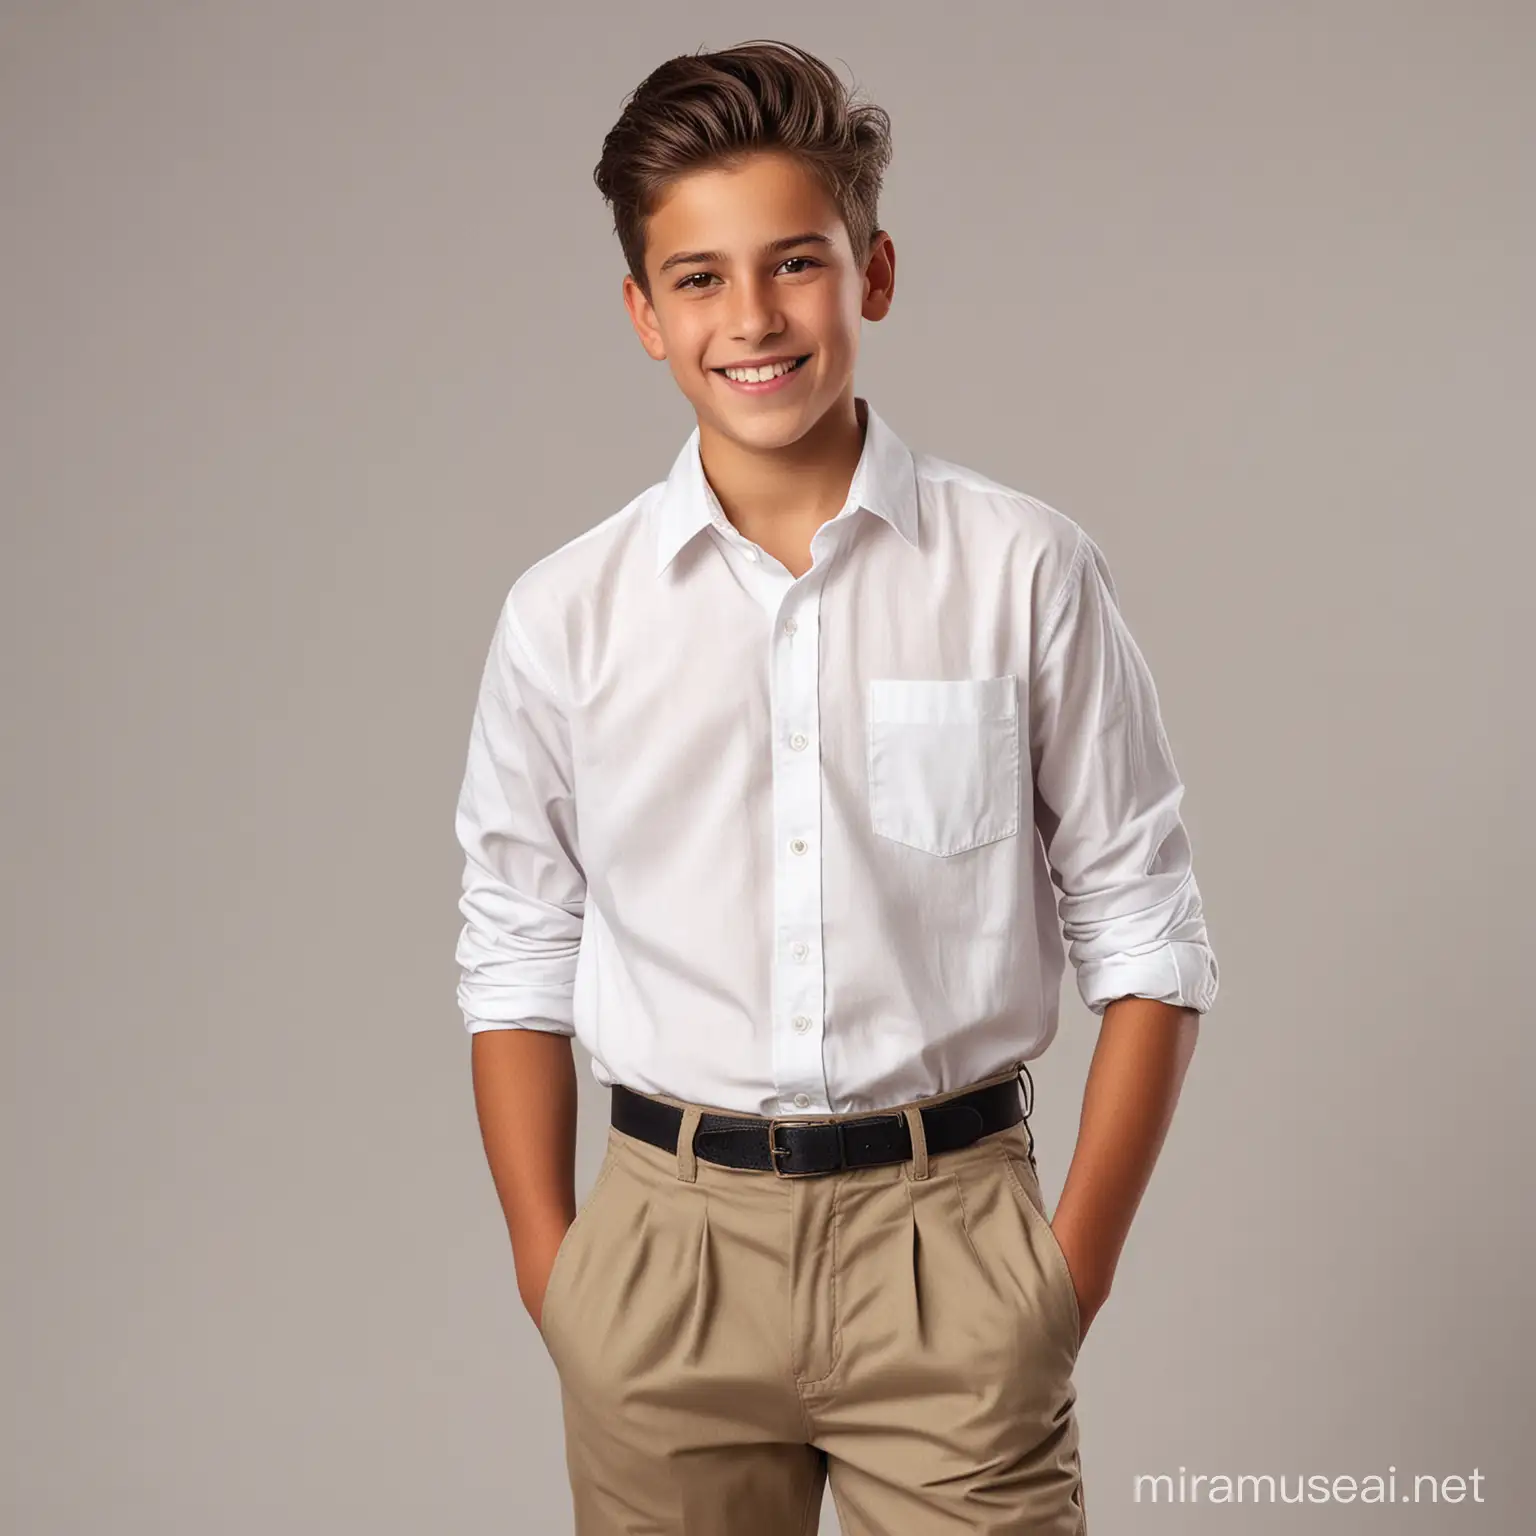  A 14 year old young boy with fine hairstyle who is wearing shirt and trousers and smiling at the camera who is so admirable.full body.his skin is white